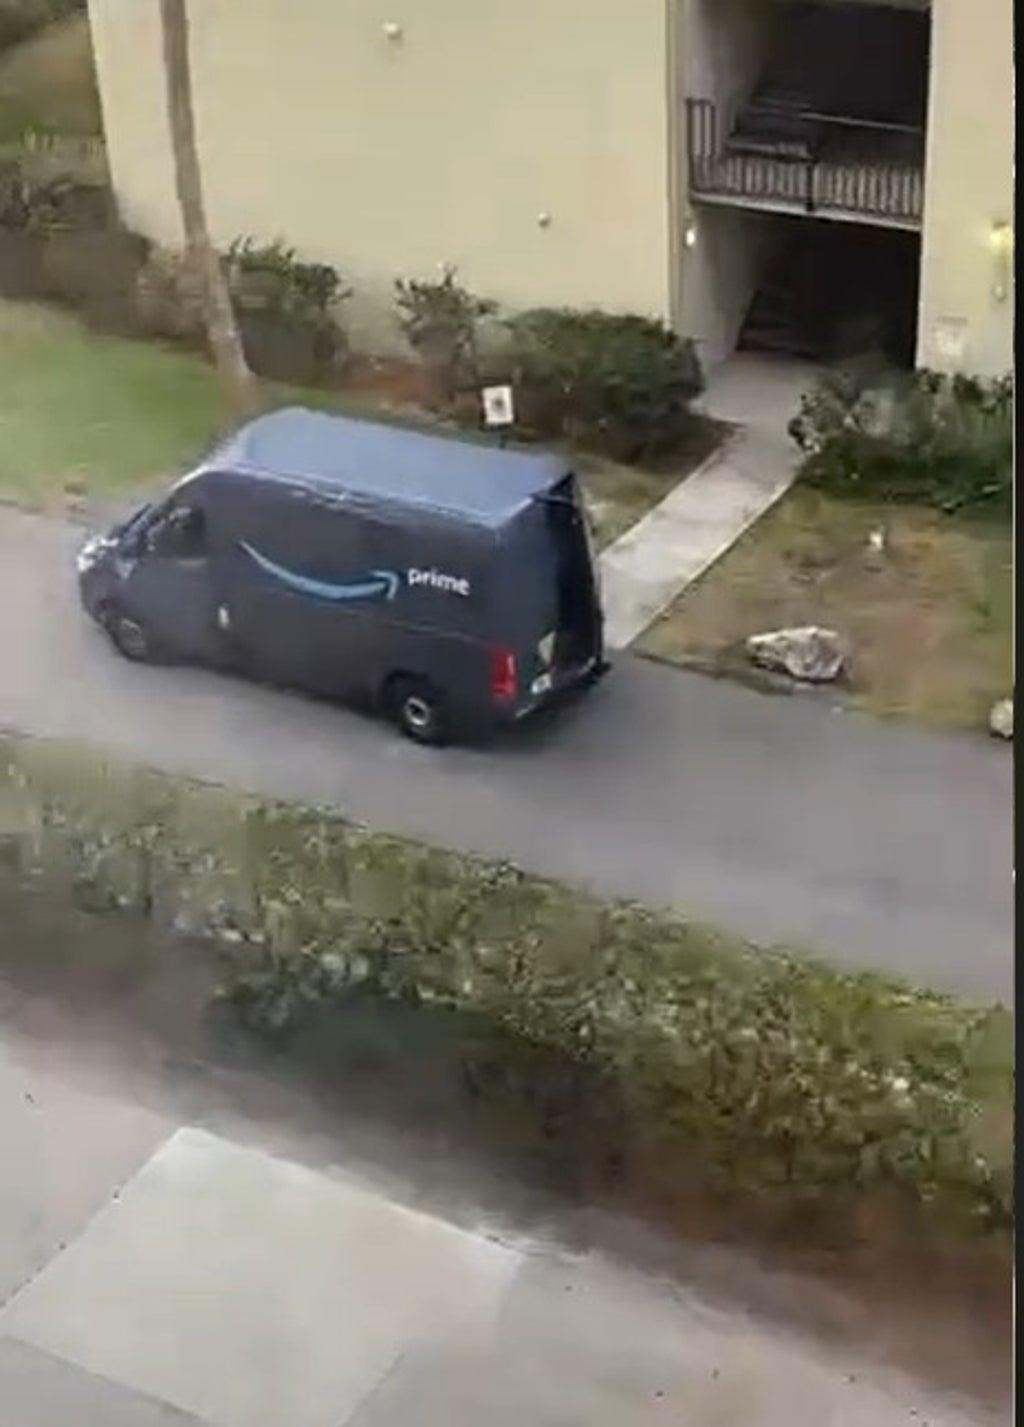 Amazon delivery worker fired after video of woman getting out of her truck went viral